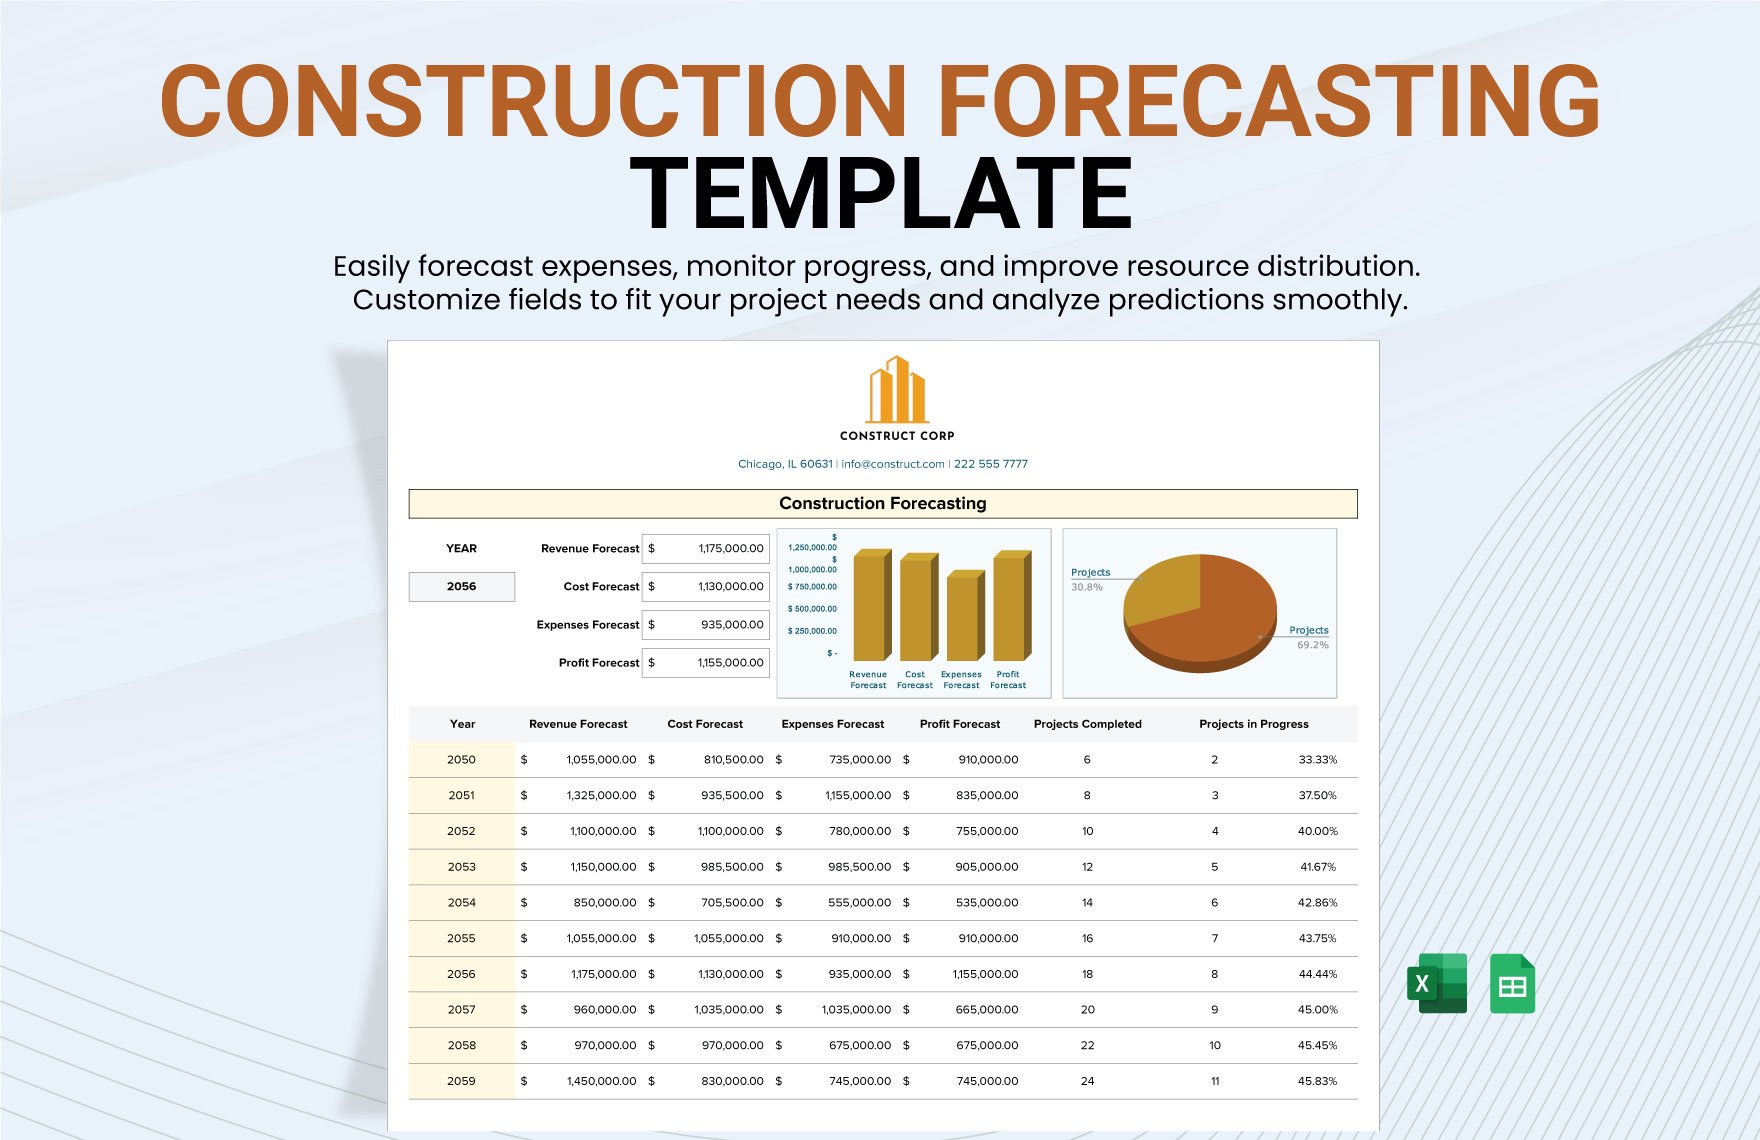 Construction Forecasting Template